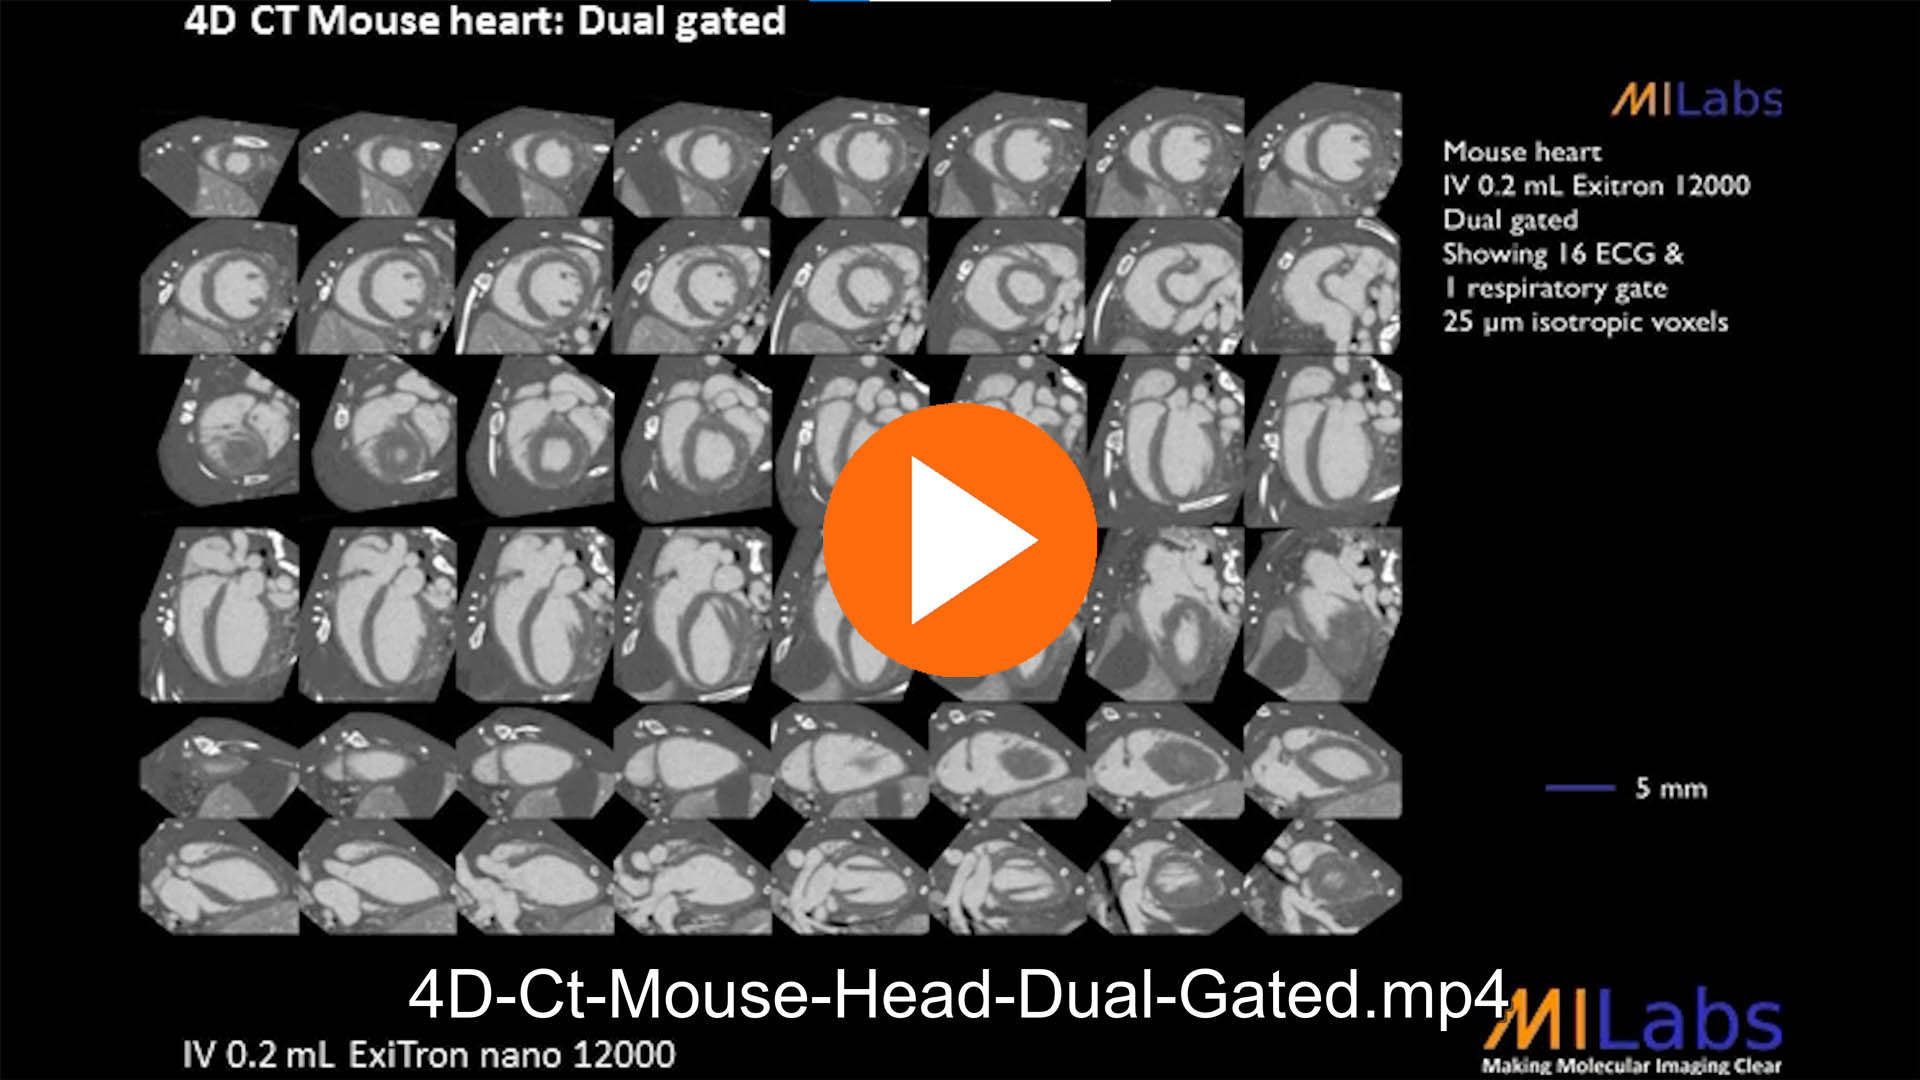 4D microCT mouse head dual gated